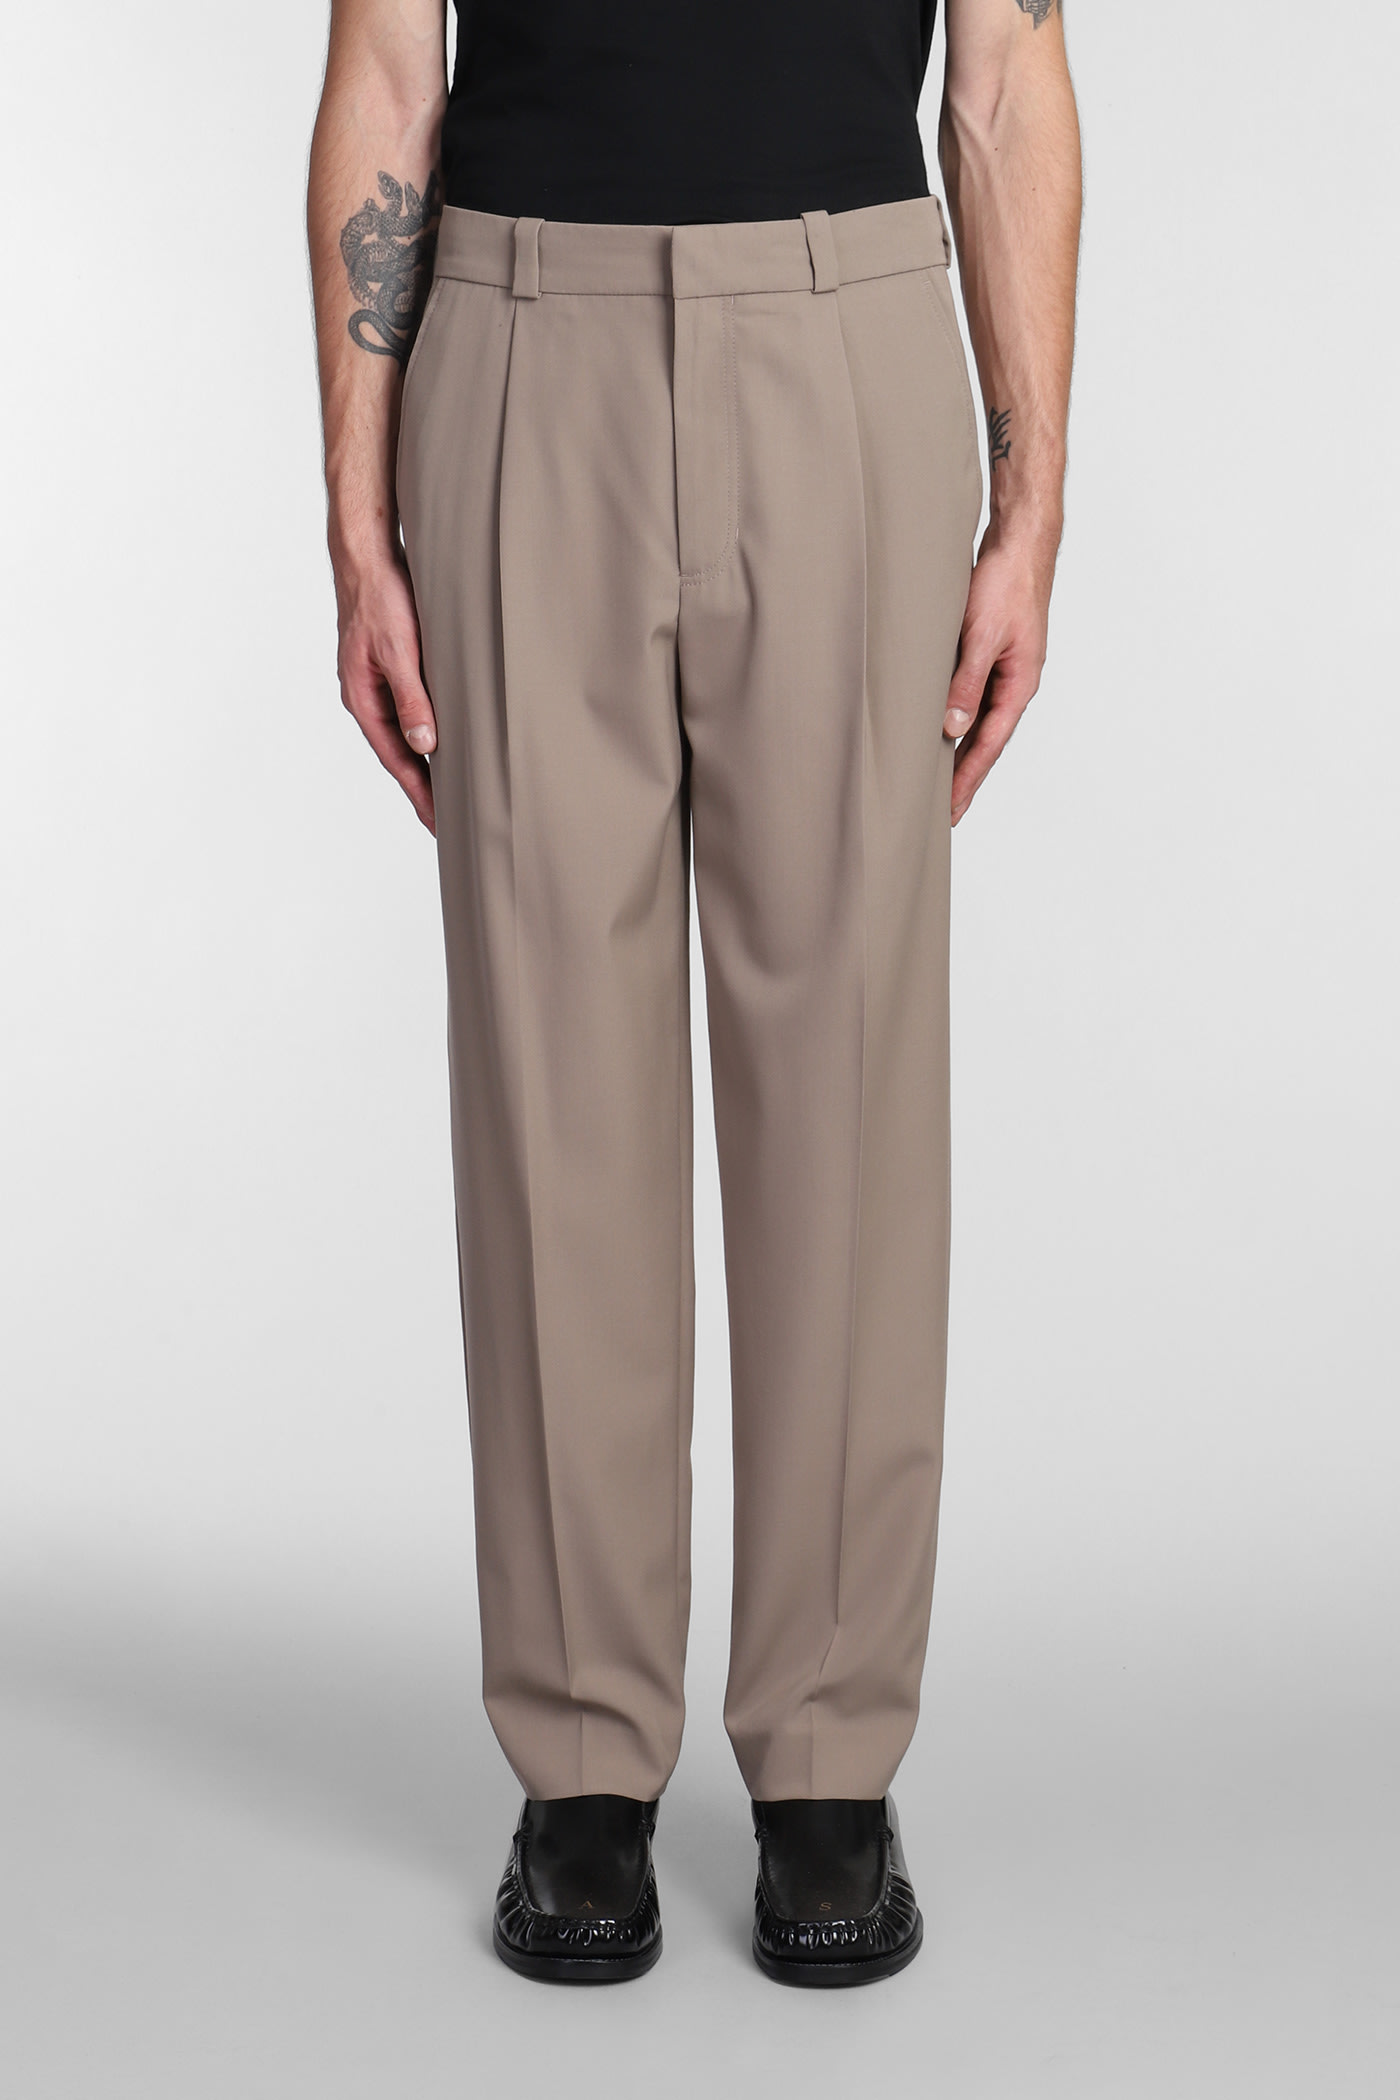 ACNE STUDIOS Flared stretch-cotton twill pants